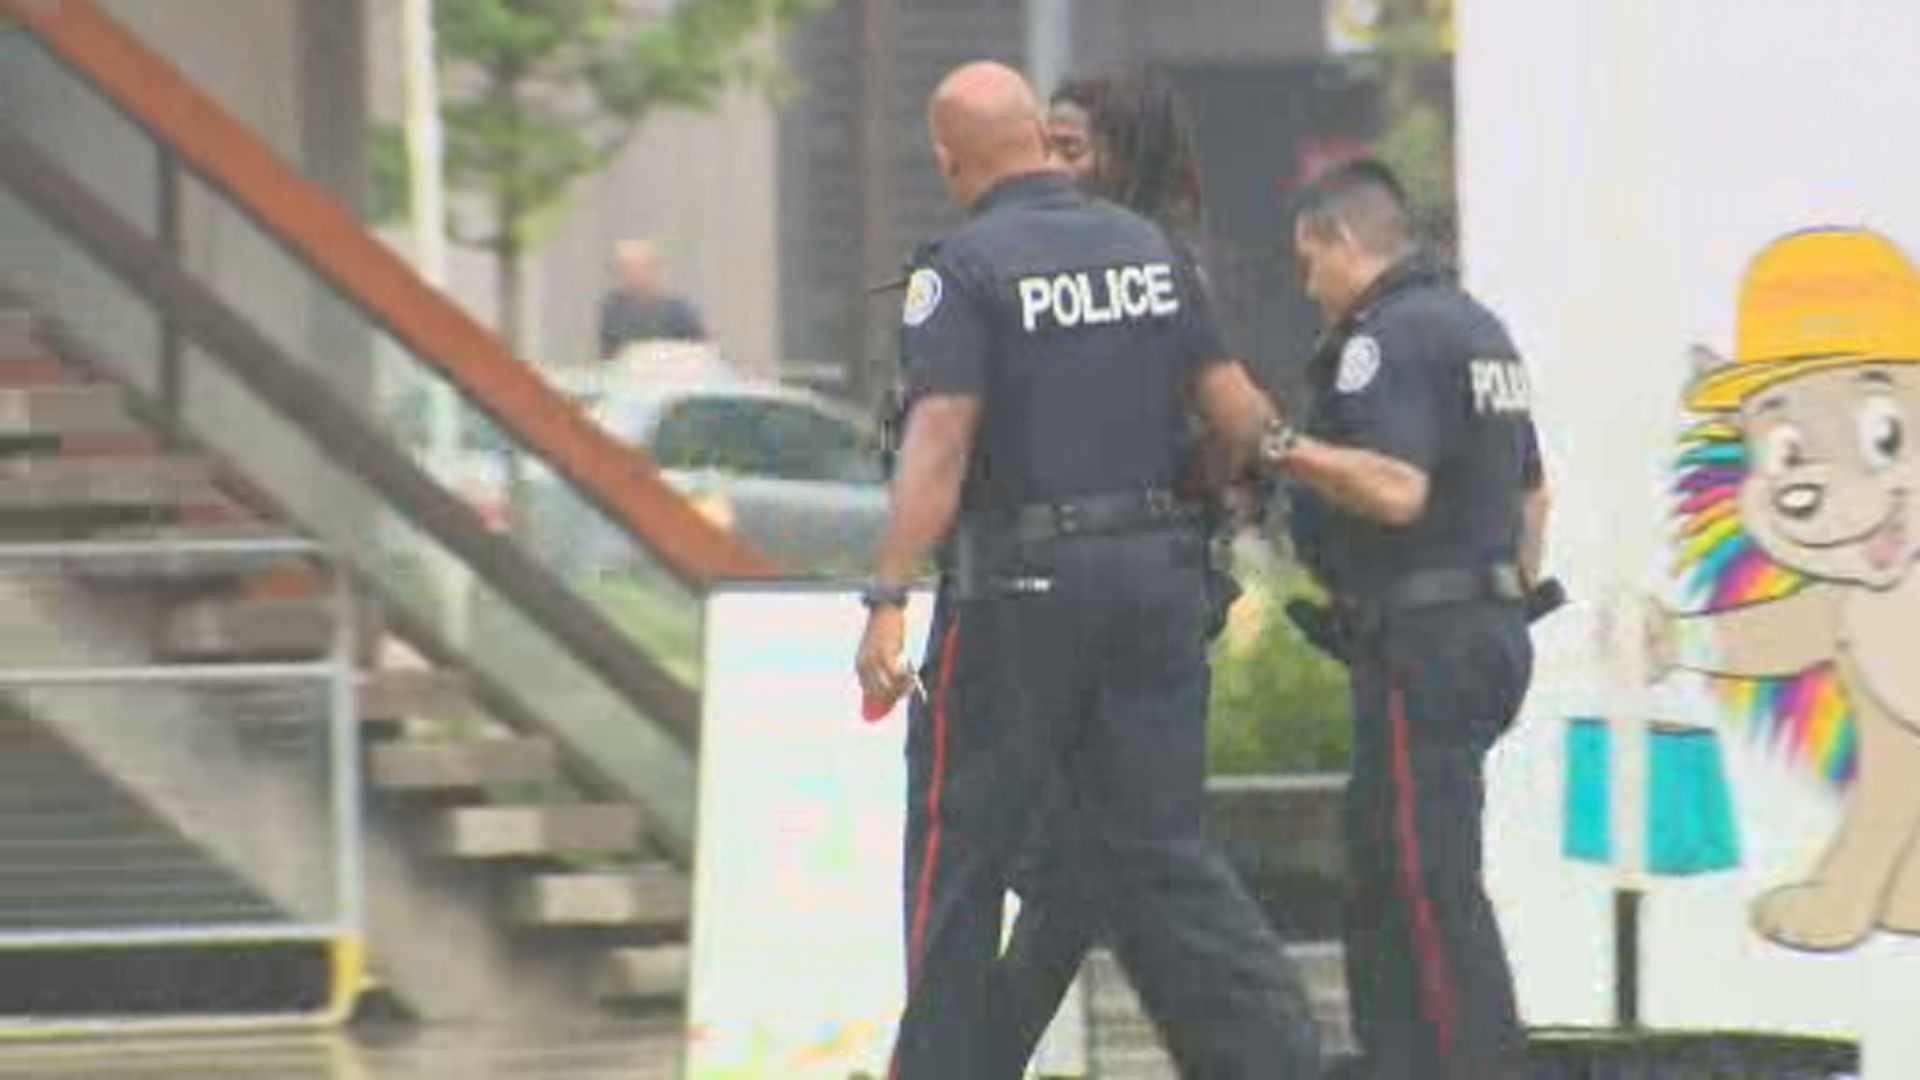 Toronto Police Apologises For Systemic Racism But Will It Change Anything?